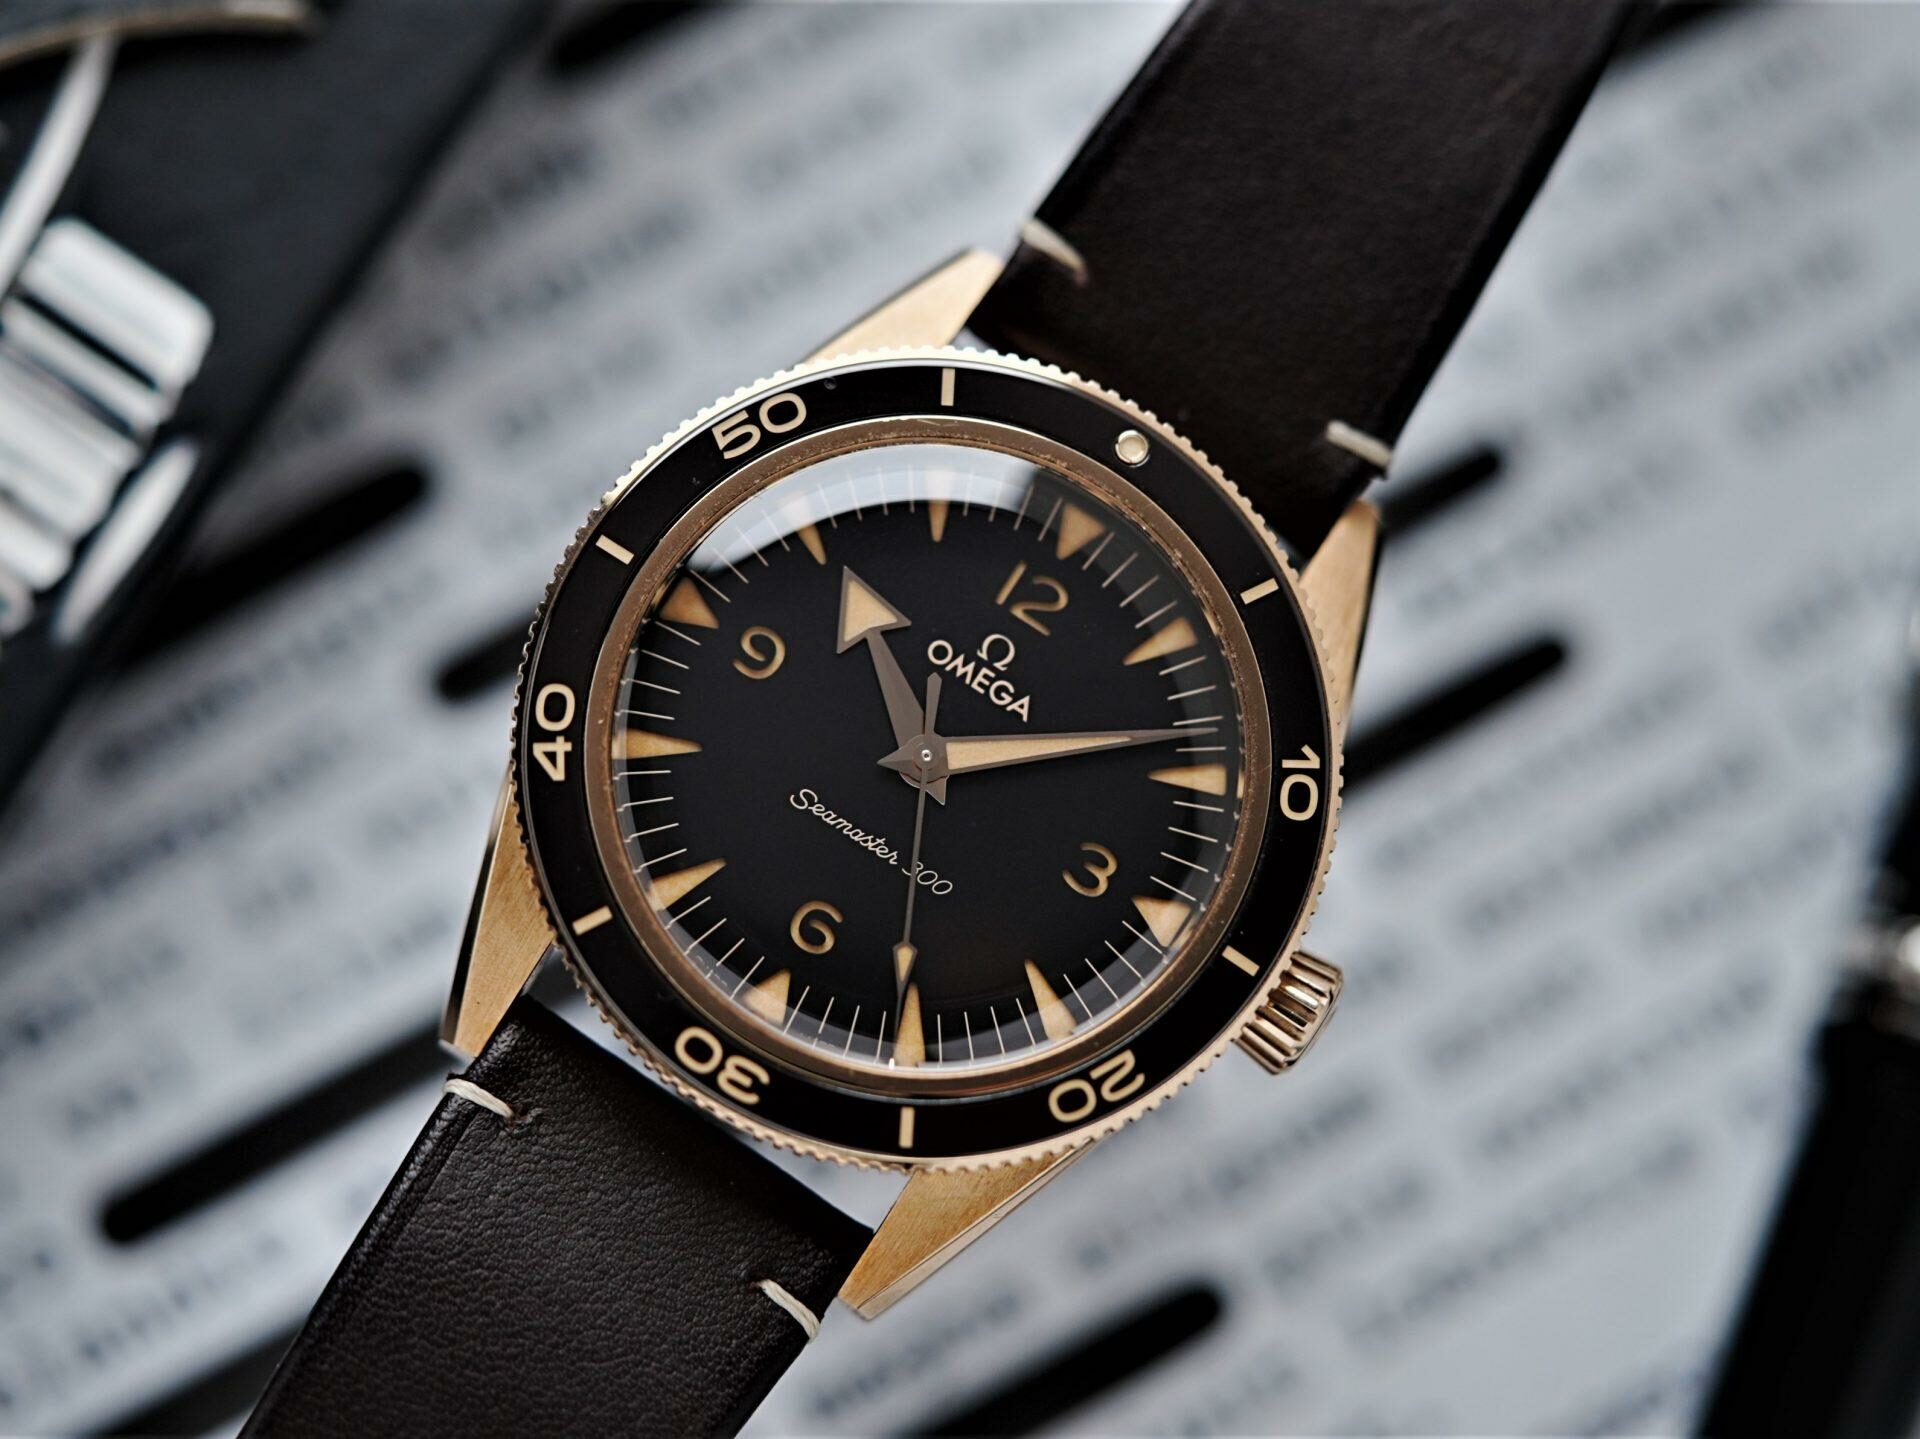 Omega Seamaster 300 Co-Axial Master Chronometer pictured on an angle under white light.